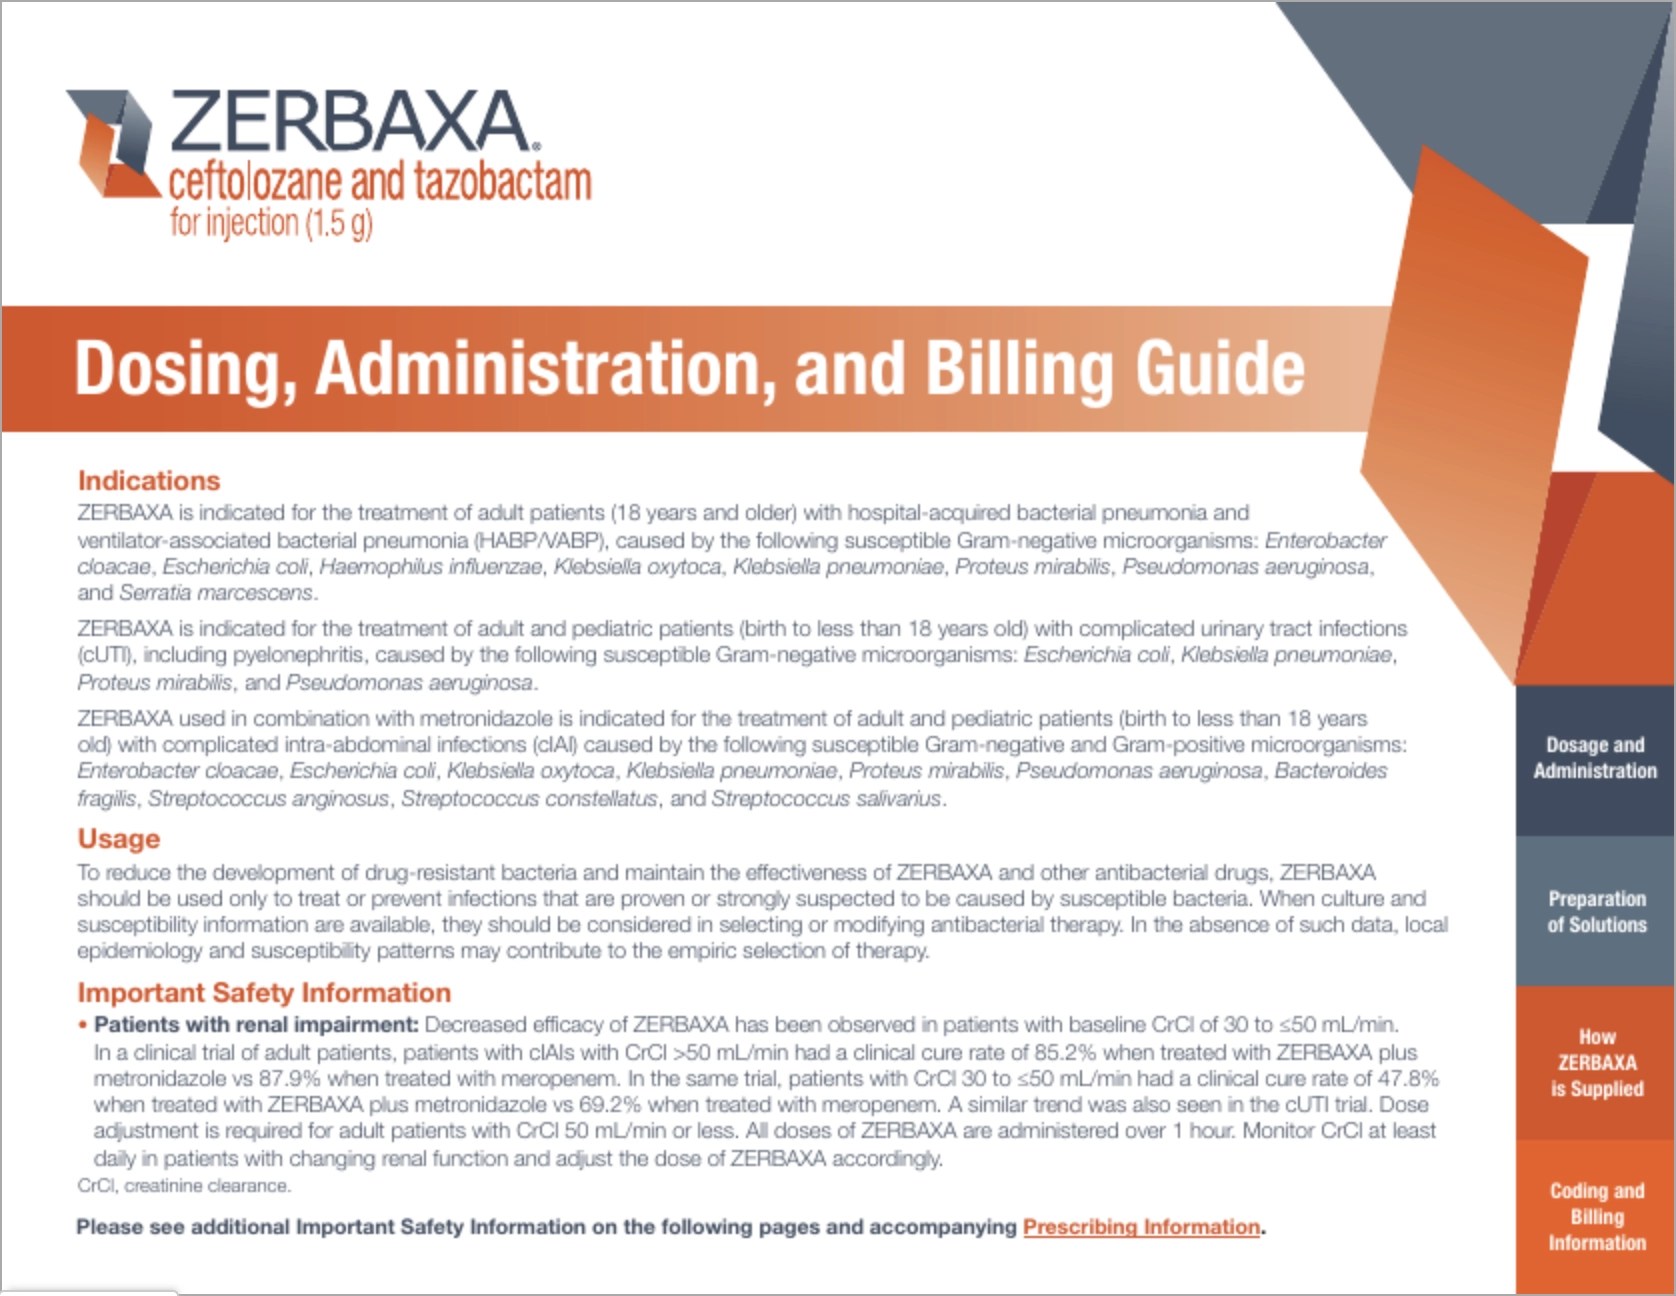 Dosing, Administration, and Billing Guide for ZERBAXA® (ceftolozane and tazobactam)